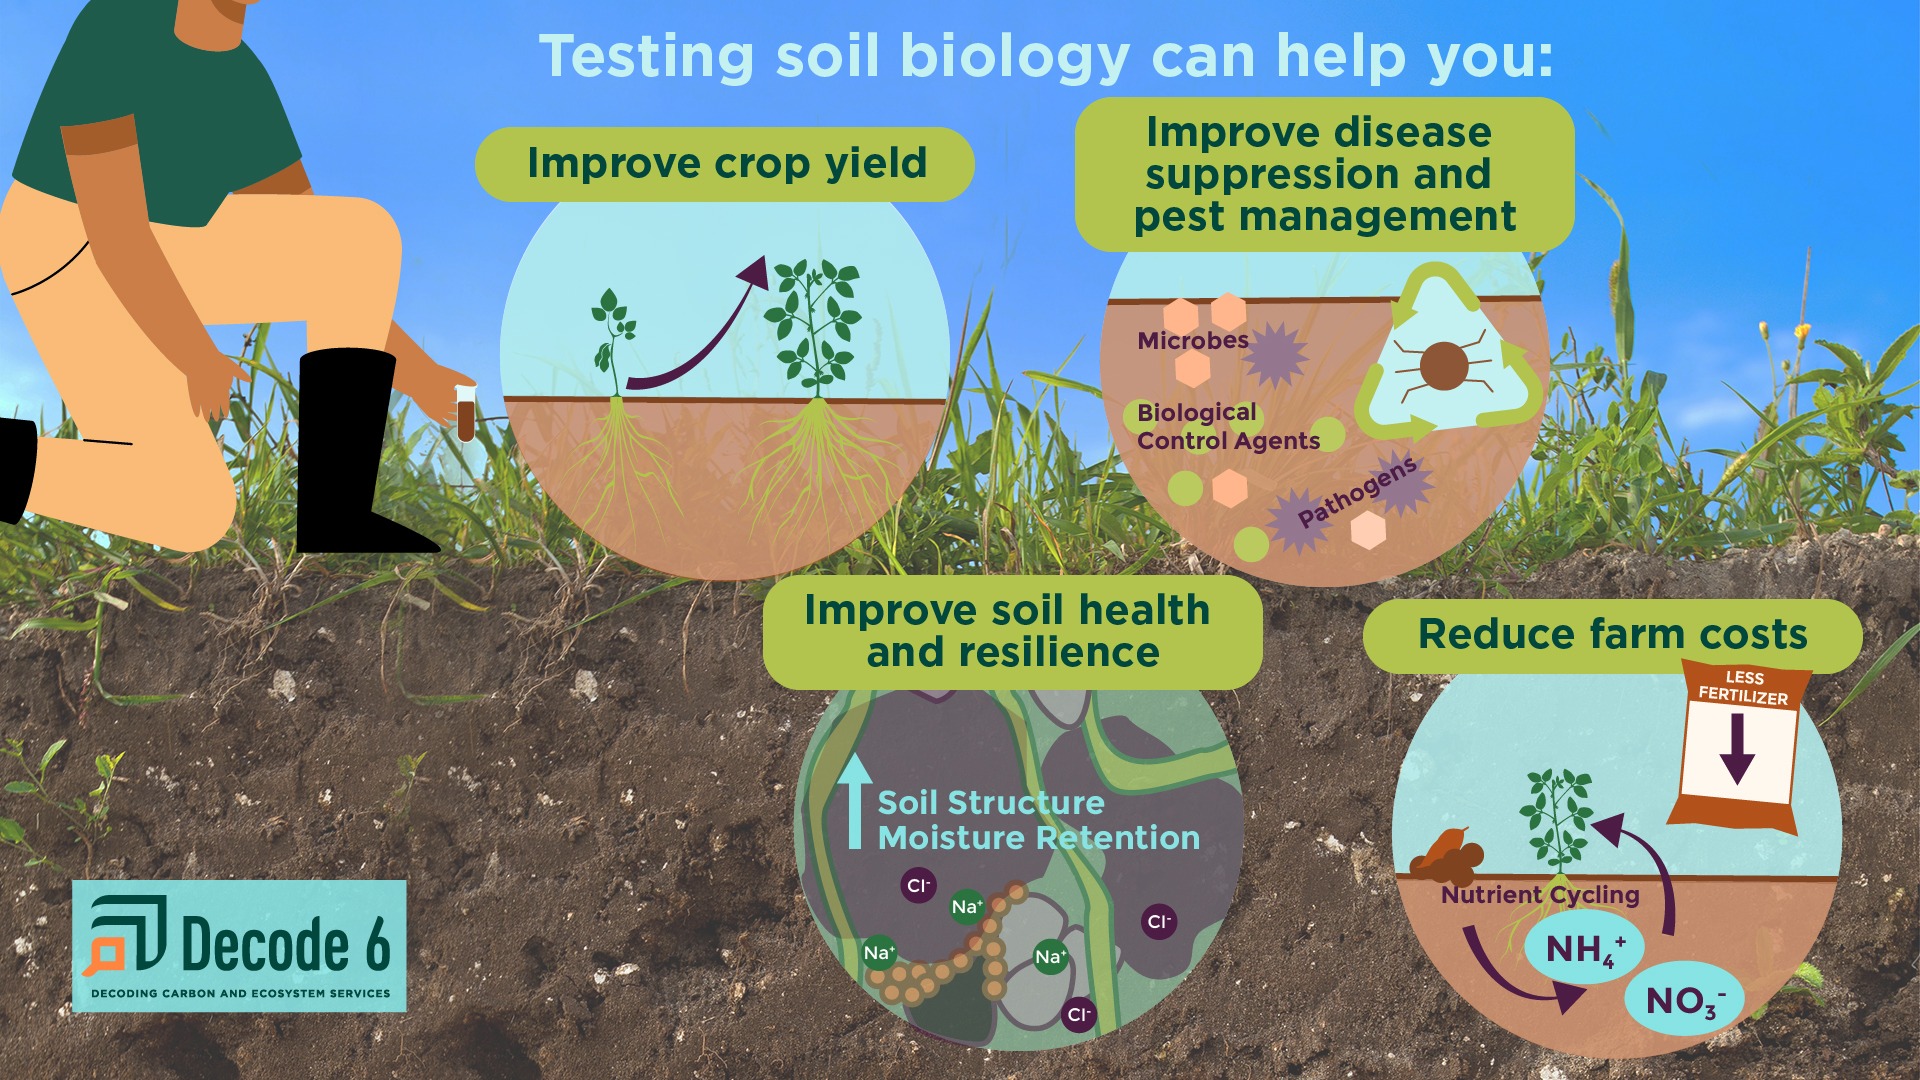 An illustrated image shows the four benefits of biological soil testing, including improved crop yields, disease suppression and pest management, reduced farm costs, and improved soil health and resilience.